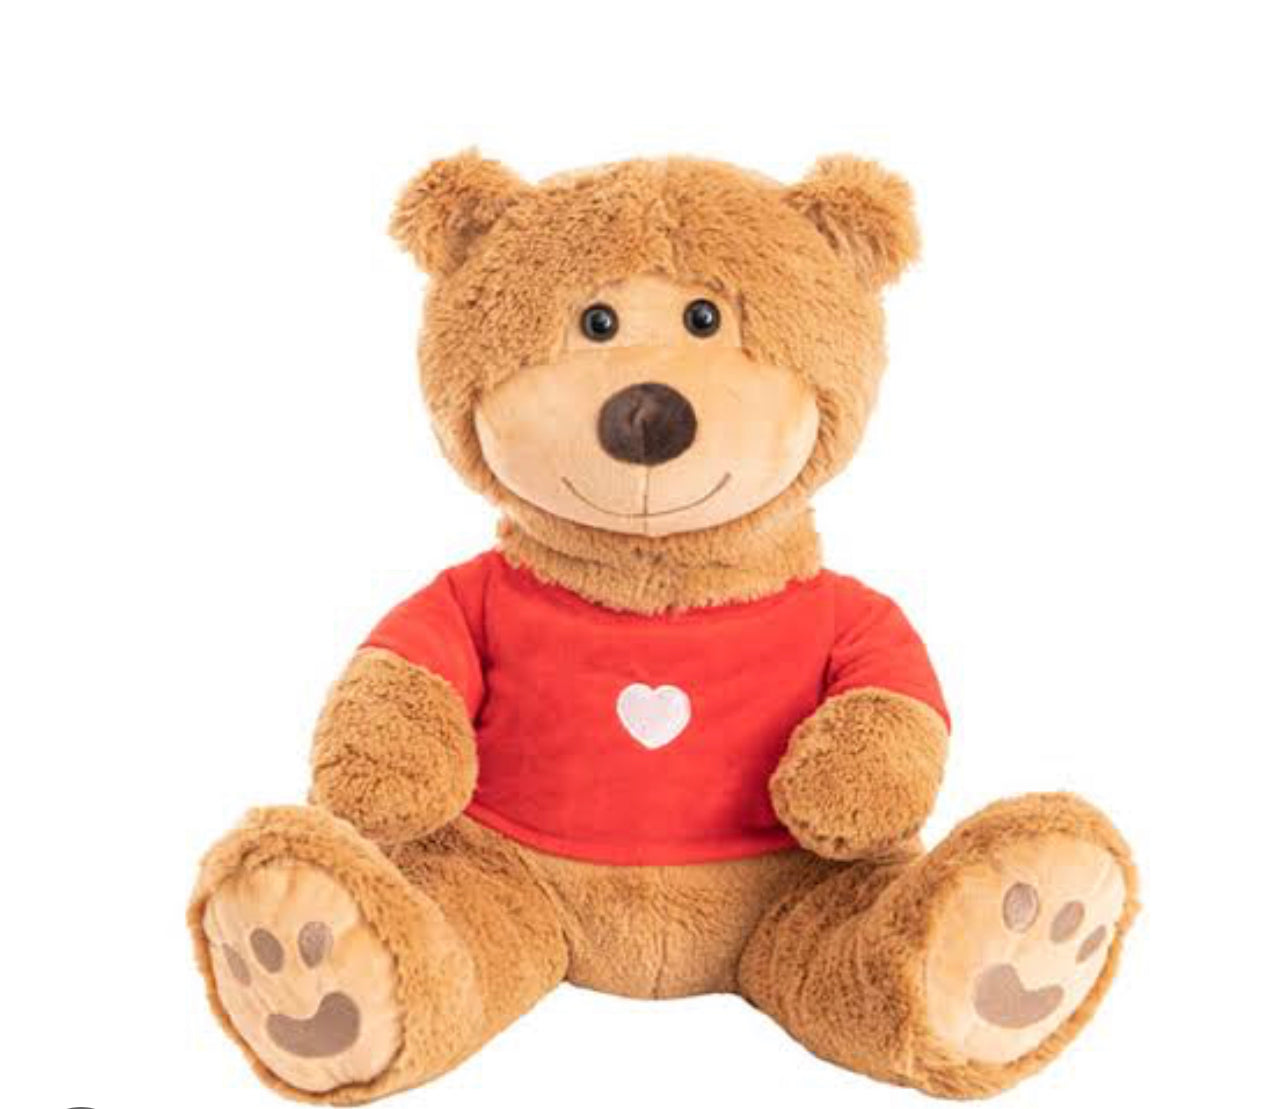 Brown teddy with red shirt